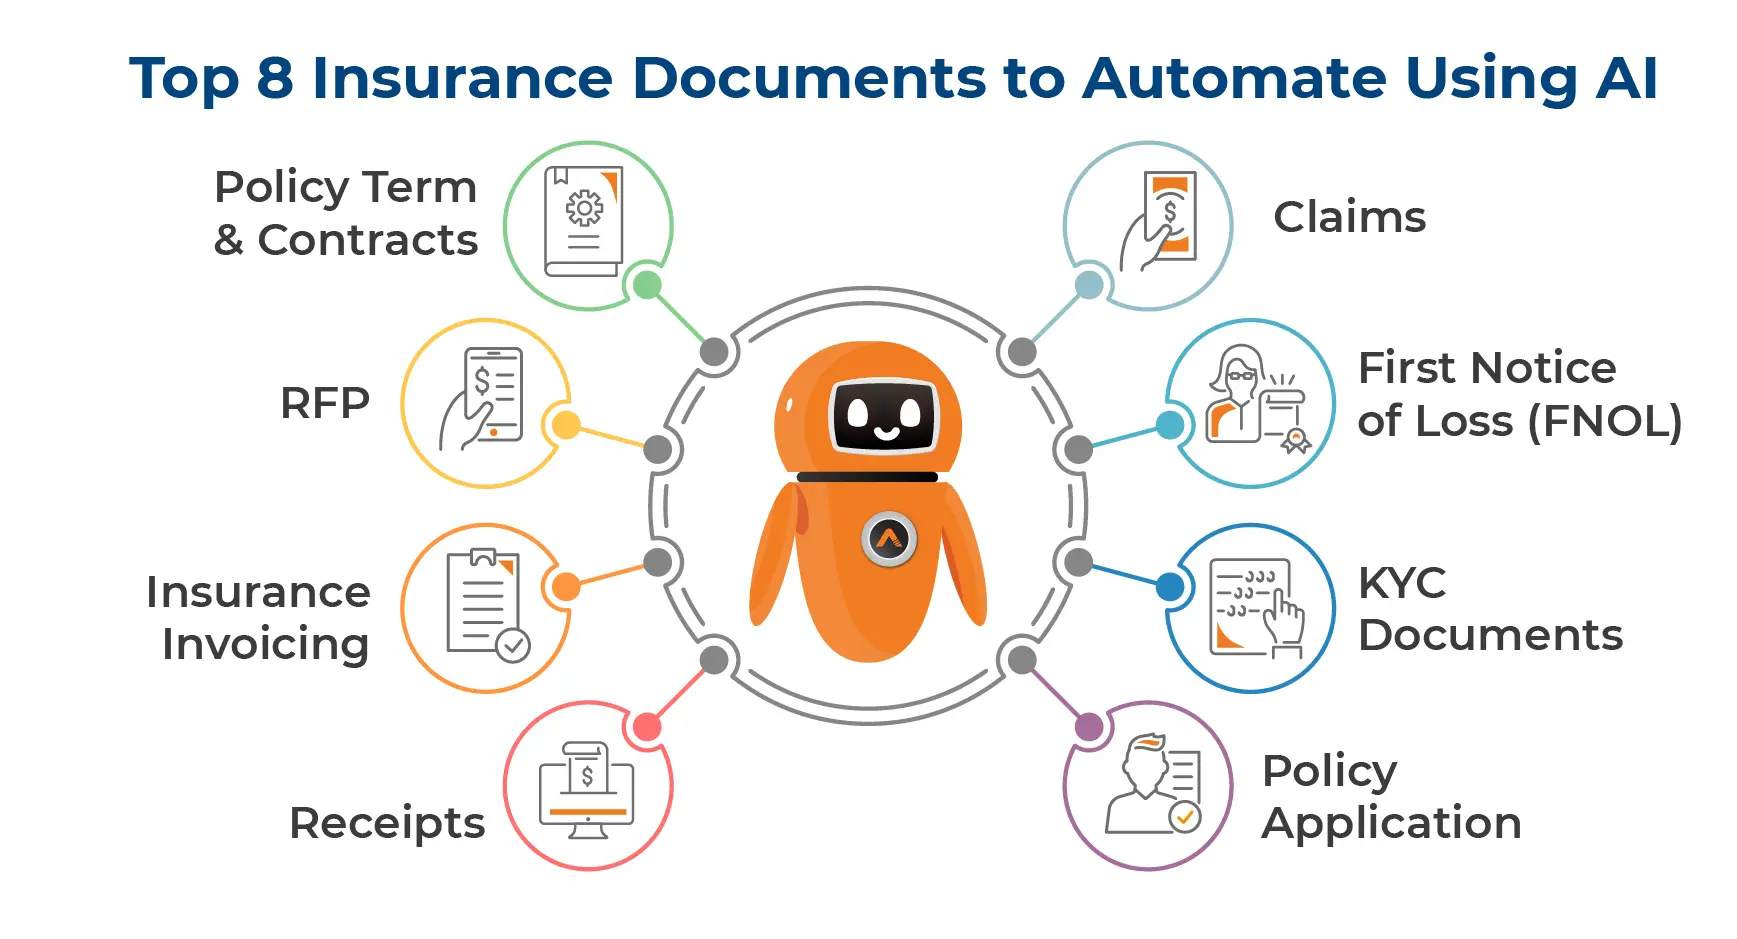 Top 8 Insurance Documents to Automate Using AI